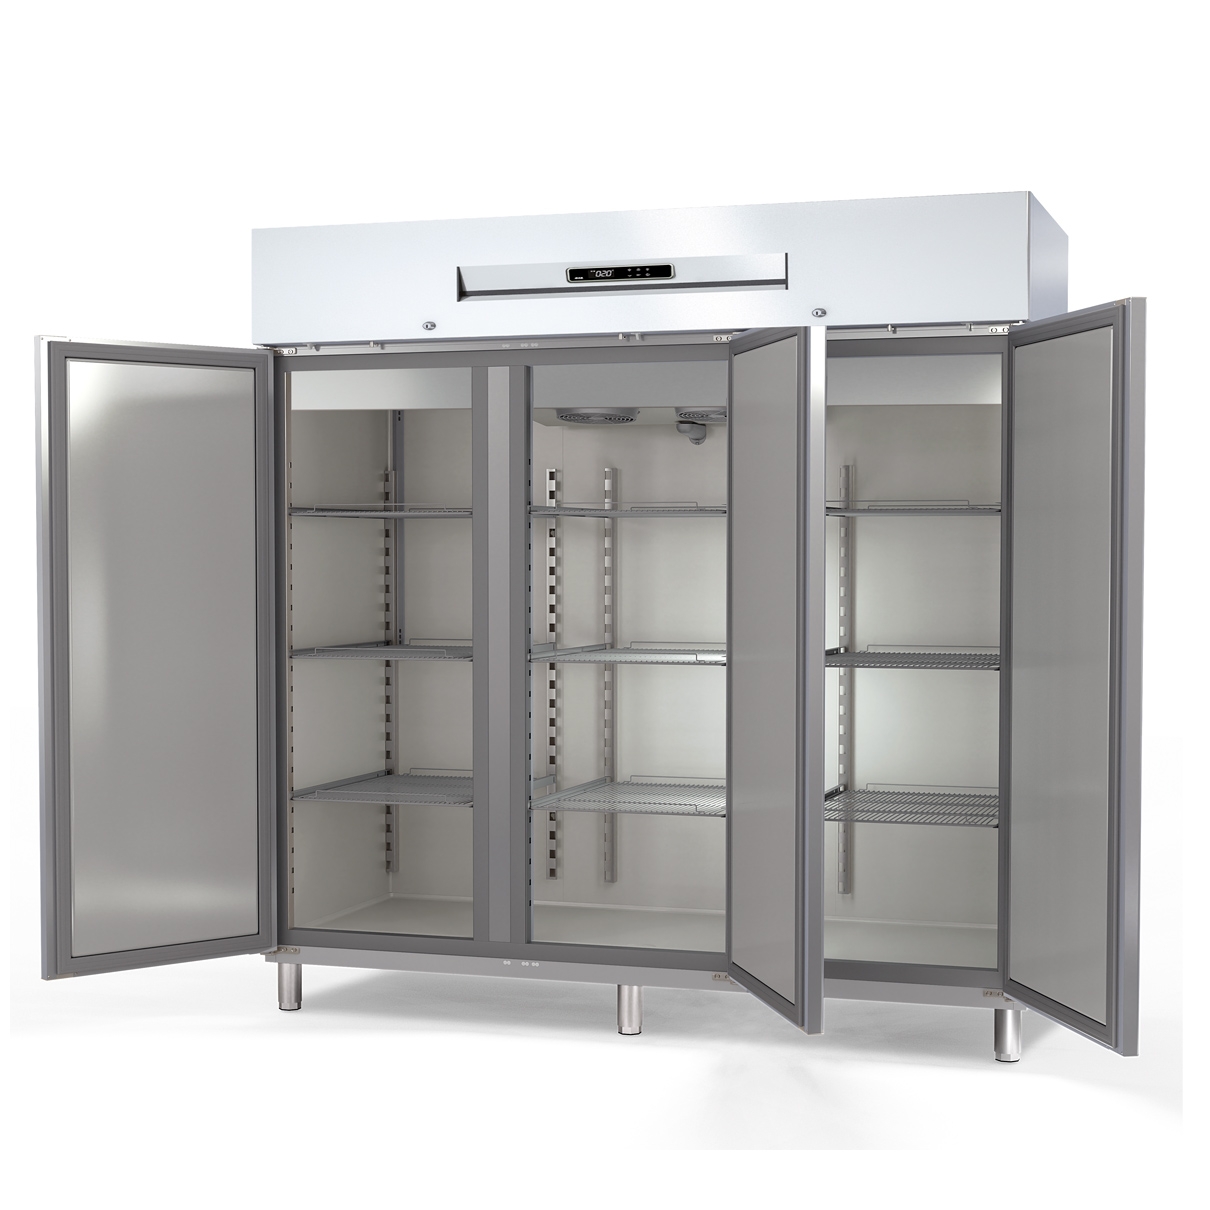 Gastronorm 2/1 Refrigerated Cabinet ARG-210-3